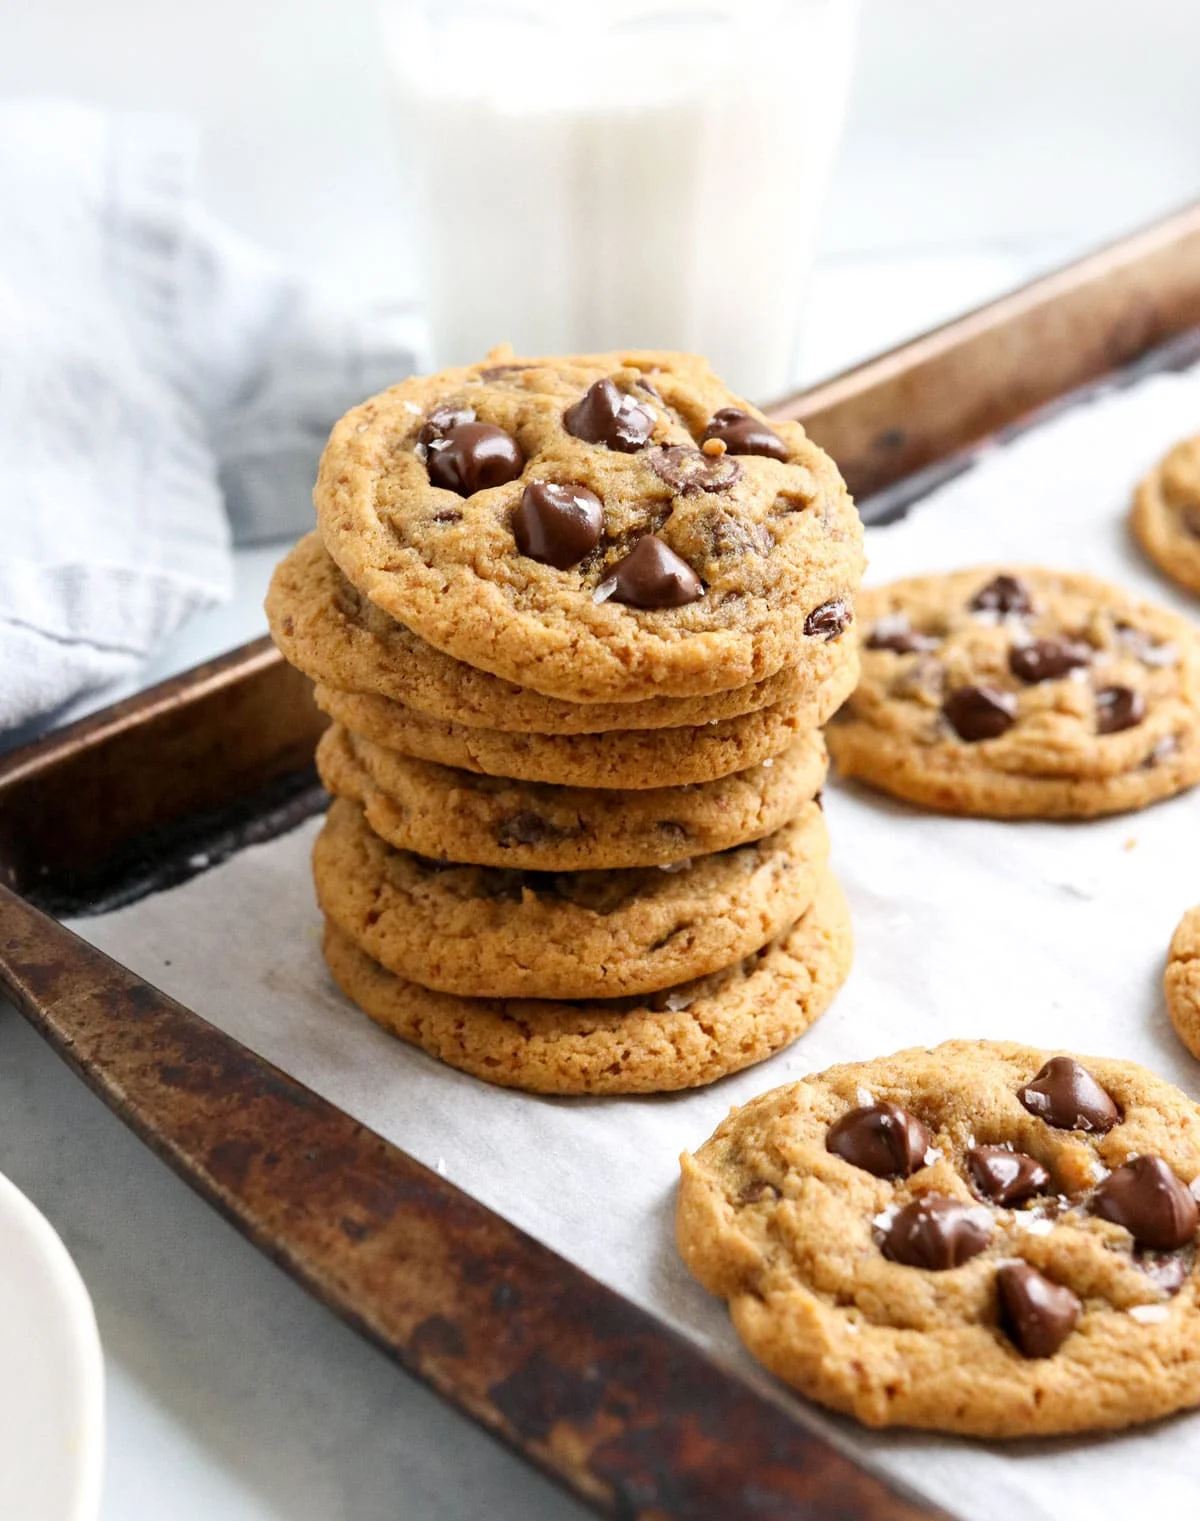 A stack of chocolate chip cookies made from chickpea or garbanzo bean flour